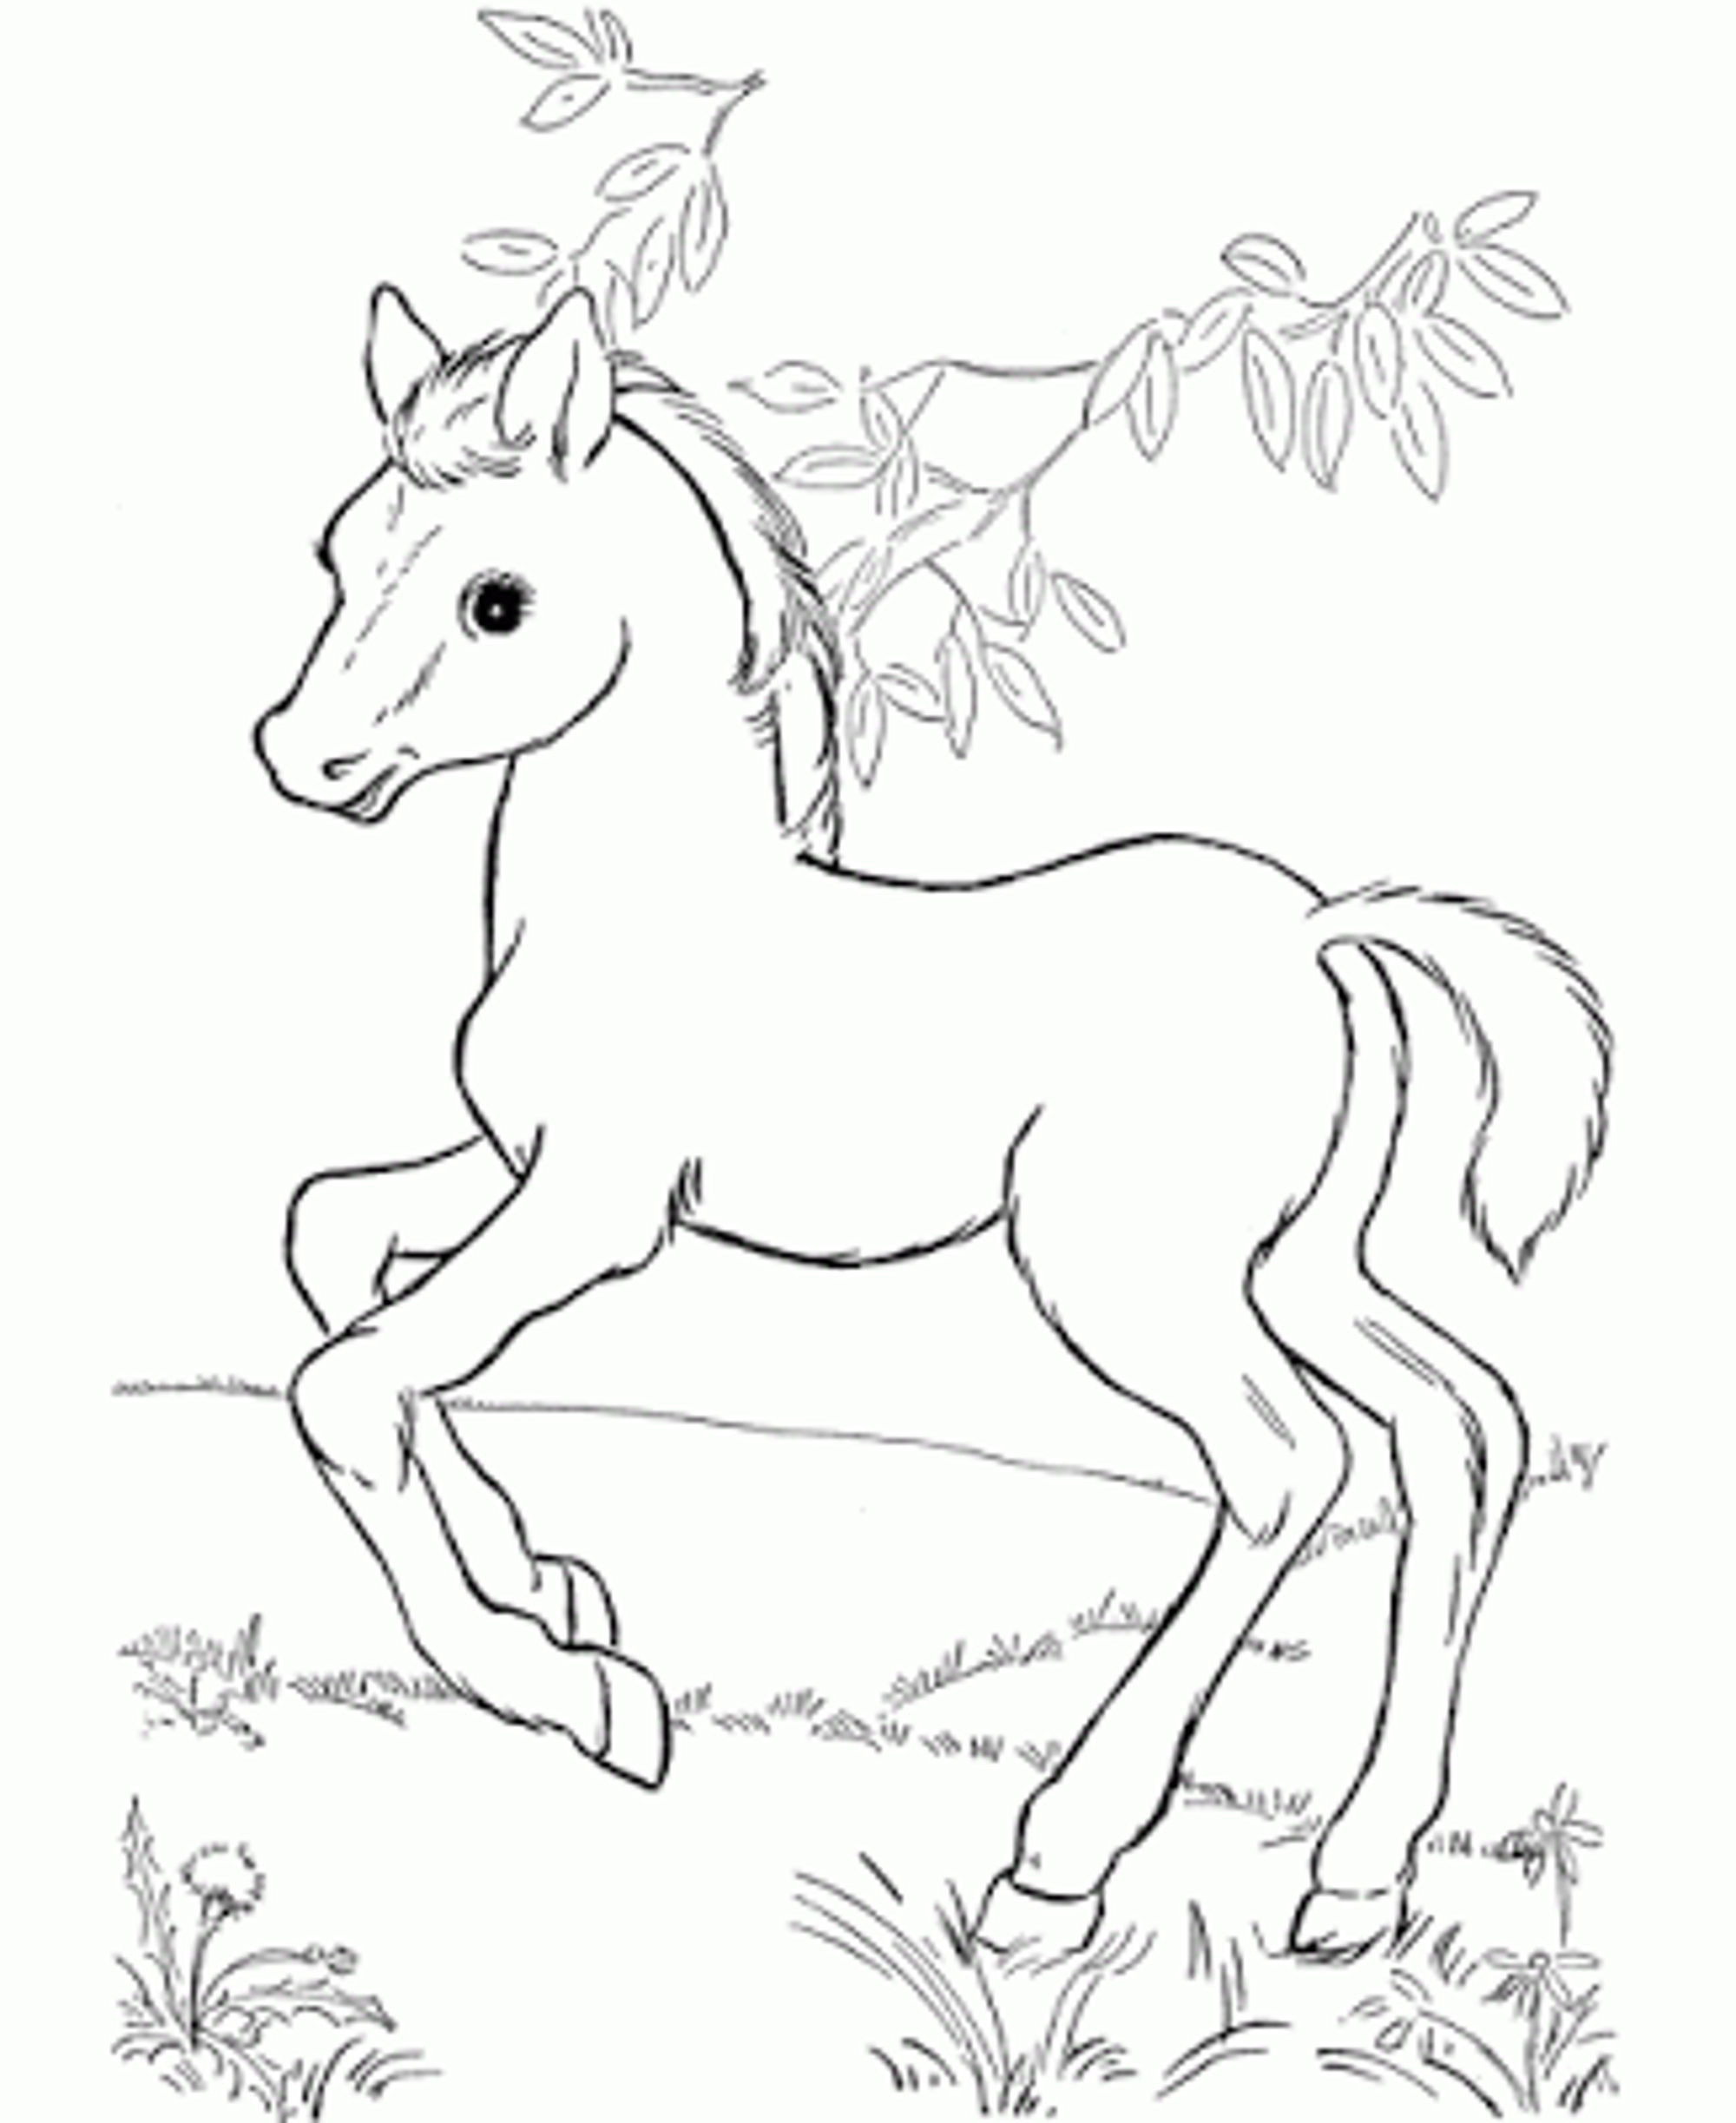 Disney Horse Coloring Pages at GetColorings.com | Free printable